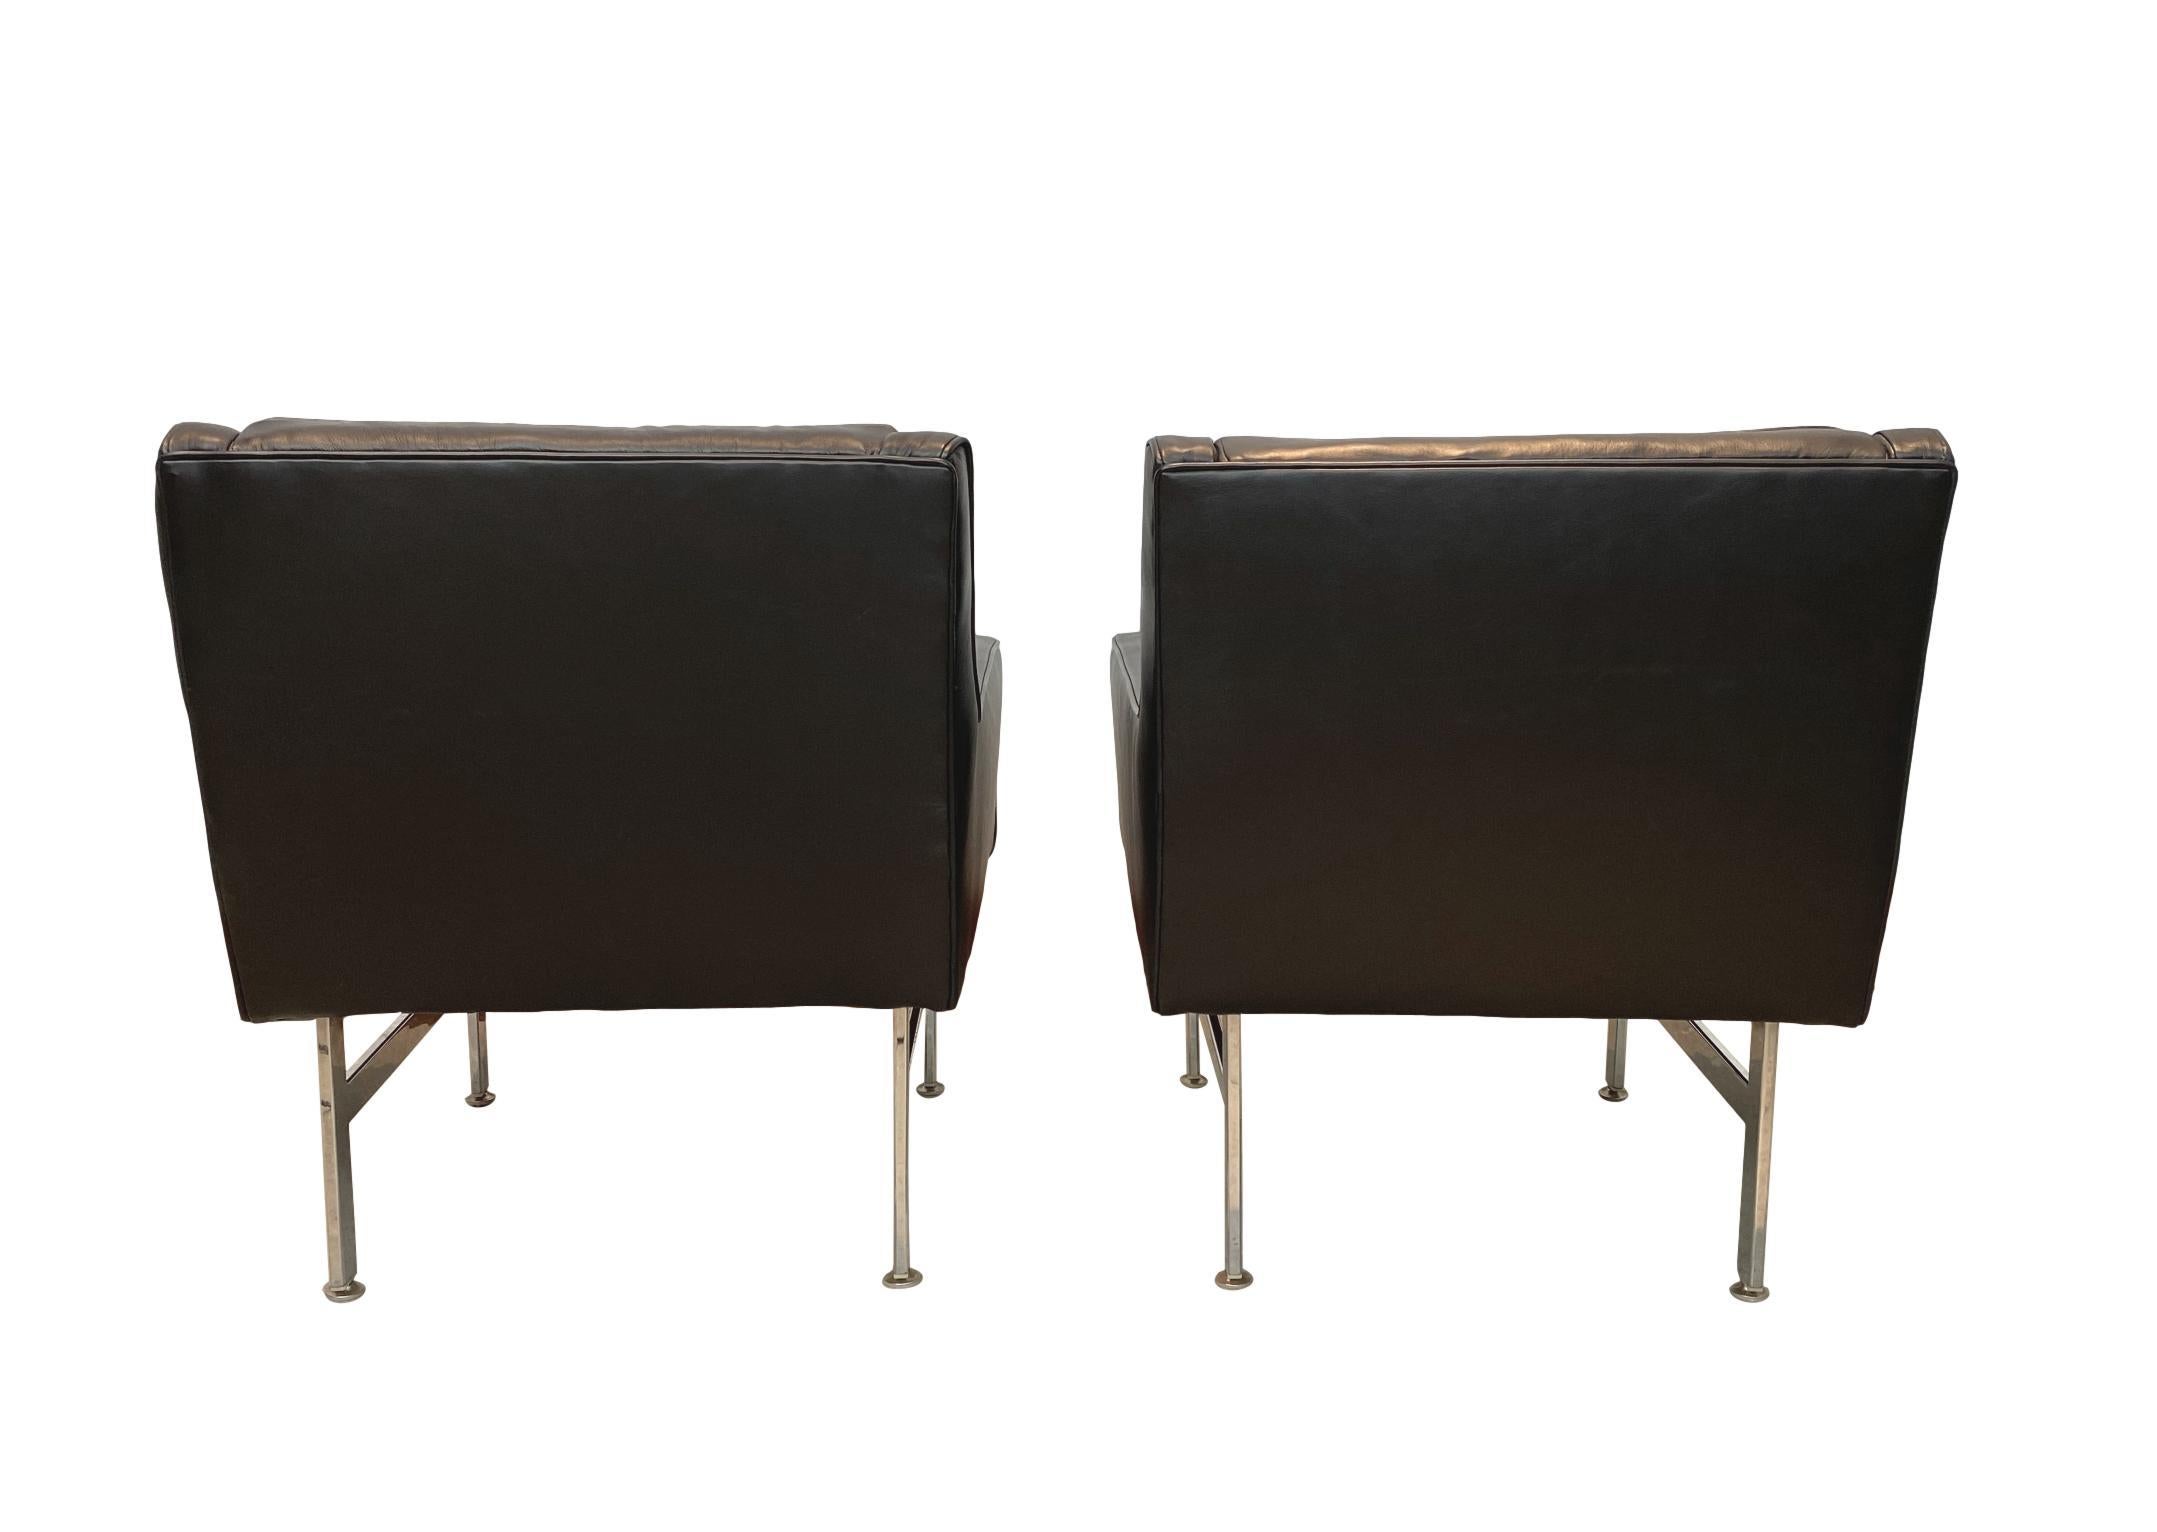 Forged Midcentury Lounge Chairs-Chrome Base-Newly Upholstered in Italian Leather, Pair For Sale